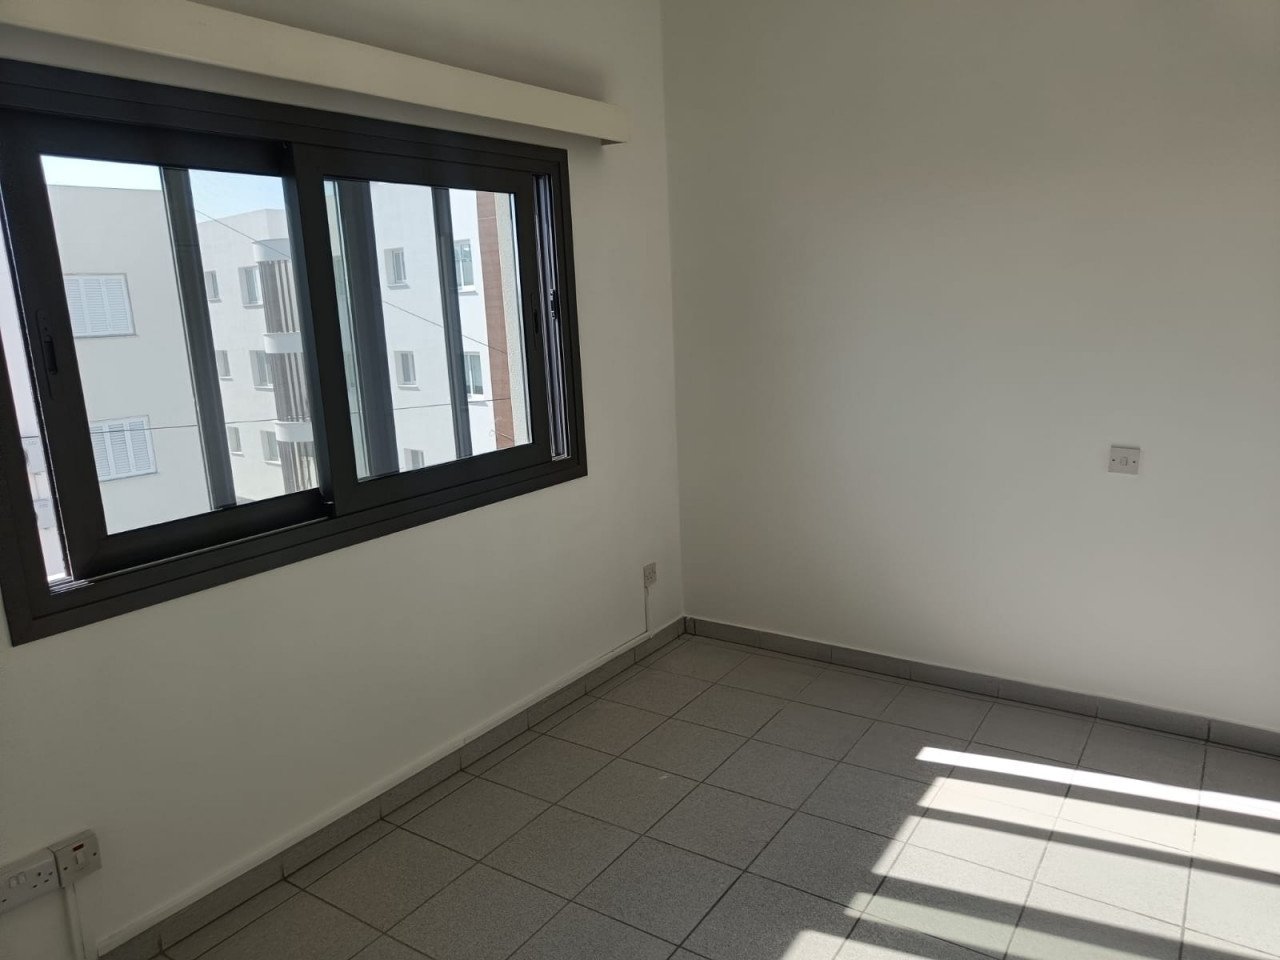 For Rent: Apartments, Strovolos, Nicosia, Cyprus FC-39059 - #8